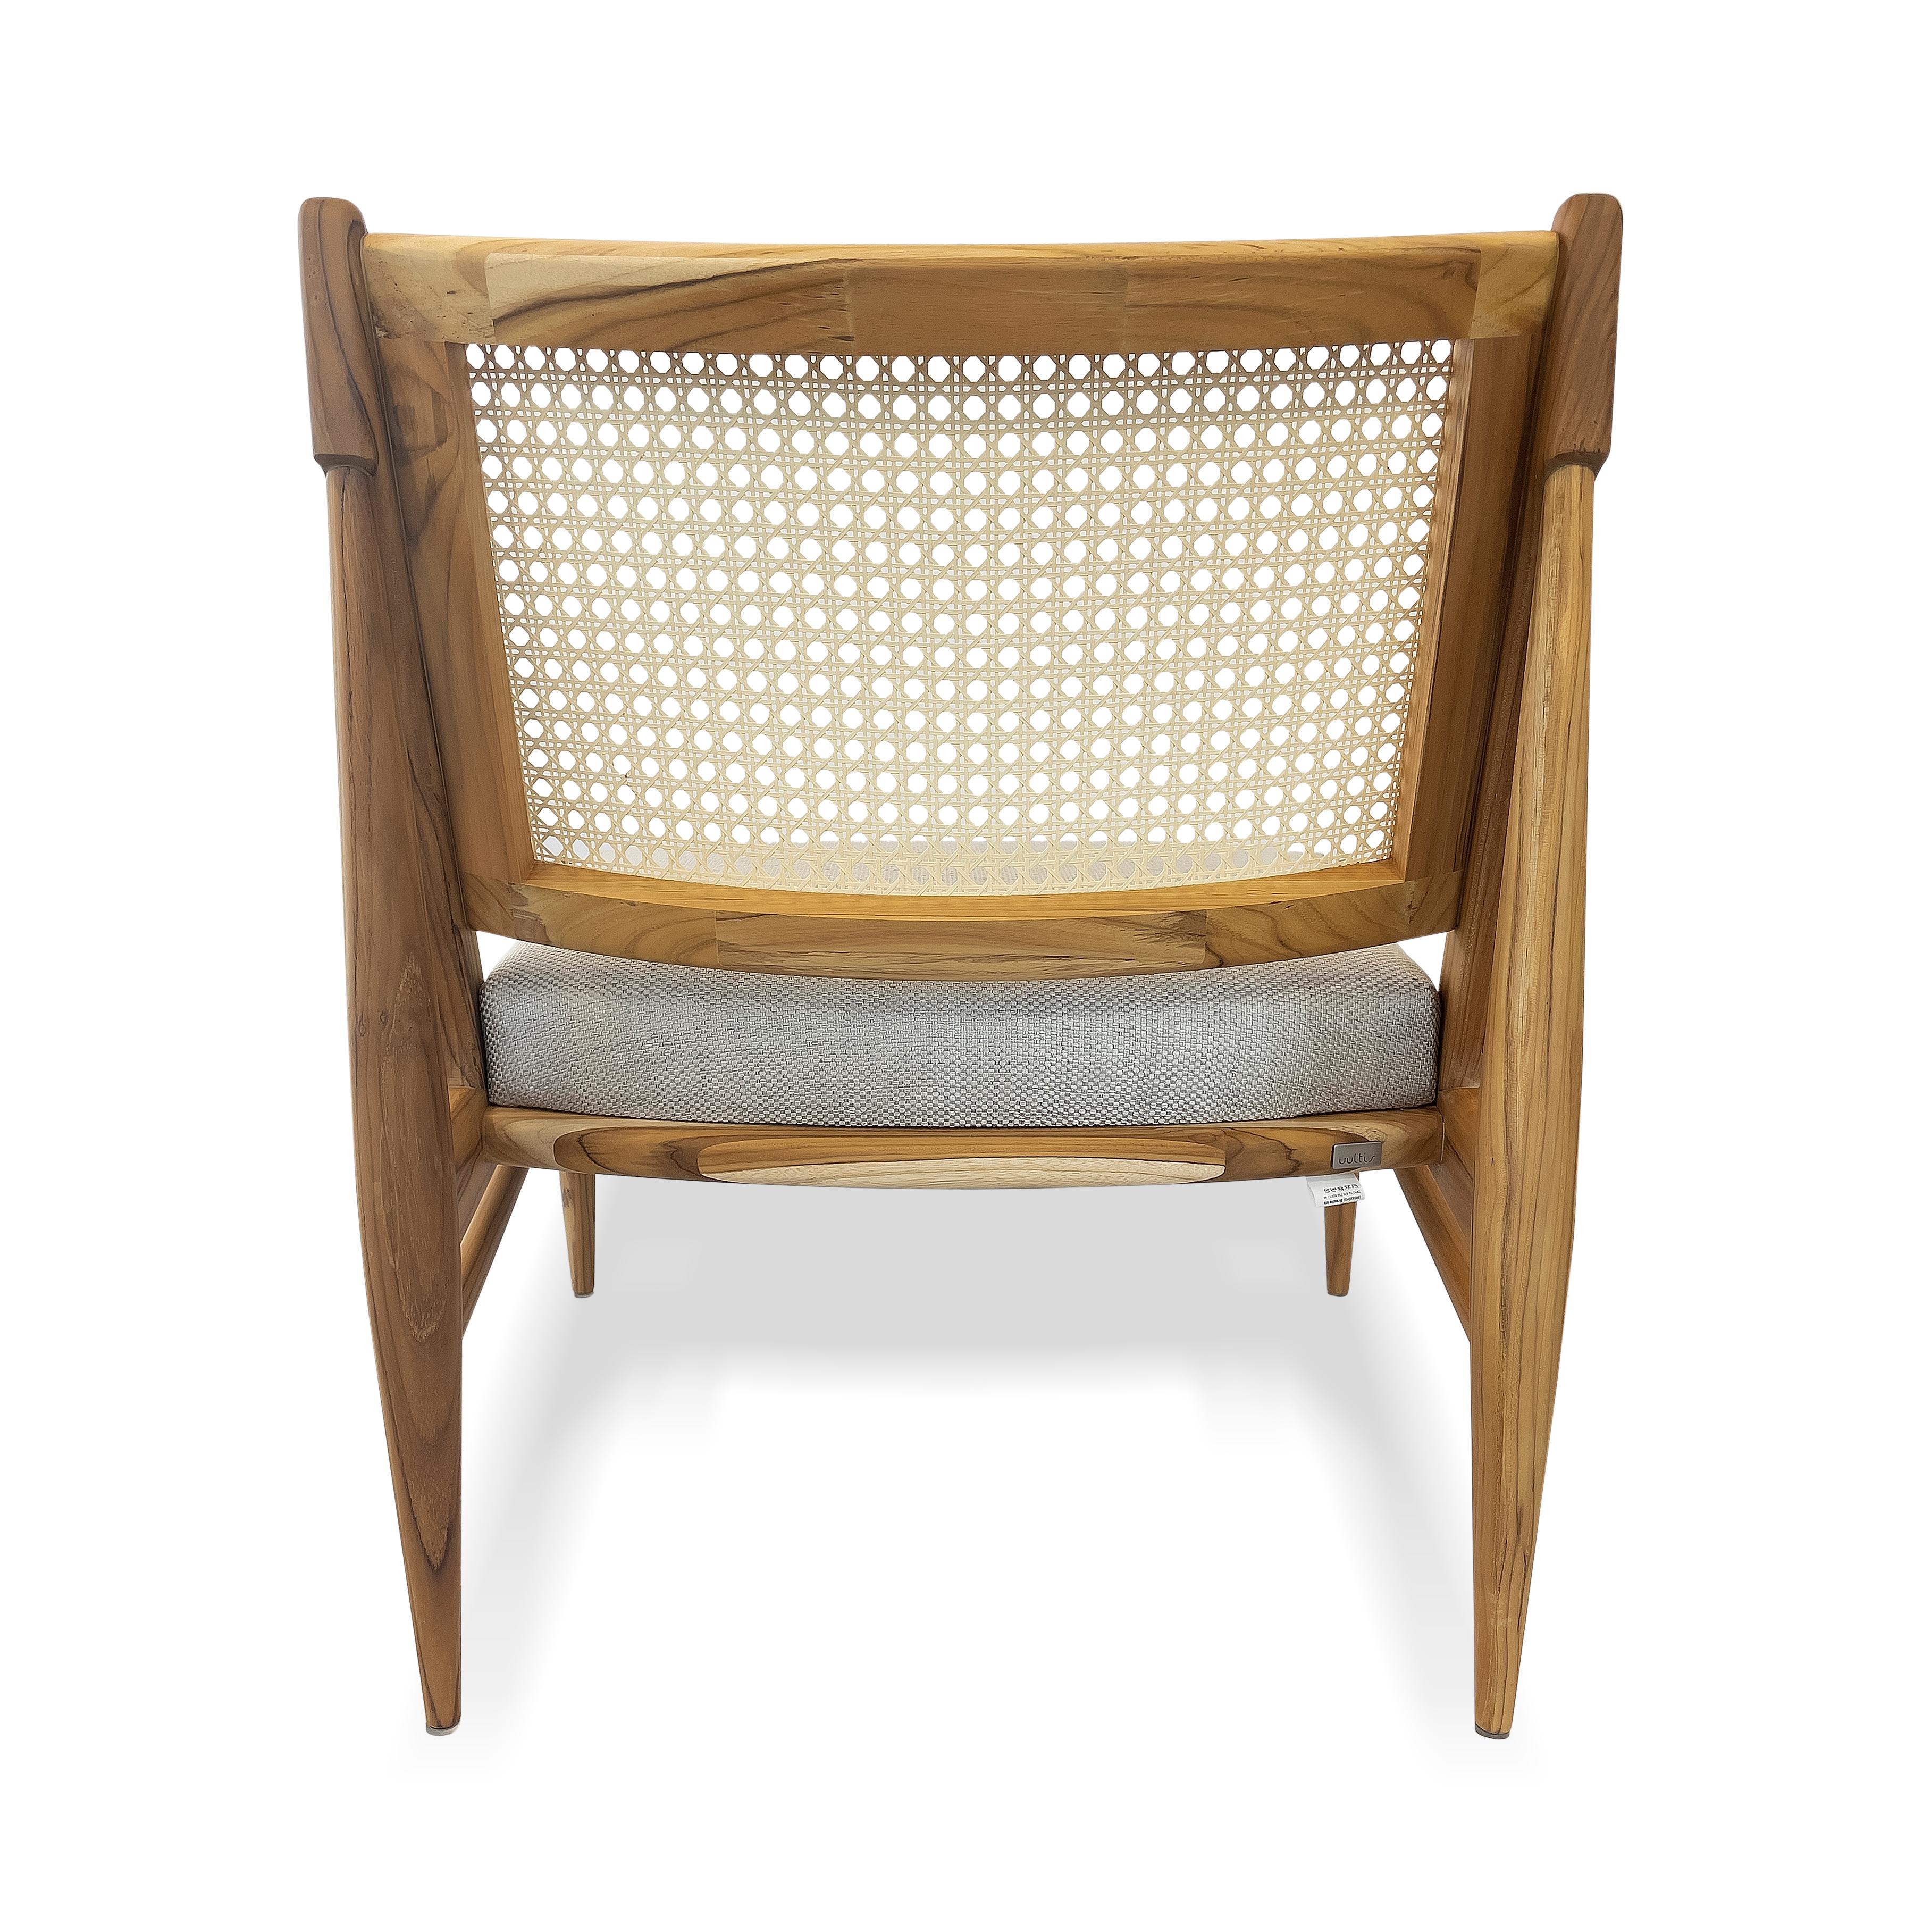 Donna Cane-Back Chair in Teak Wood Finish with Light Beige Fabric Seat In New Condition For Sale In Miami, FL